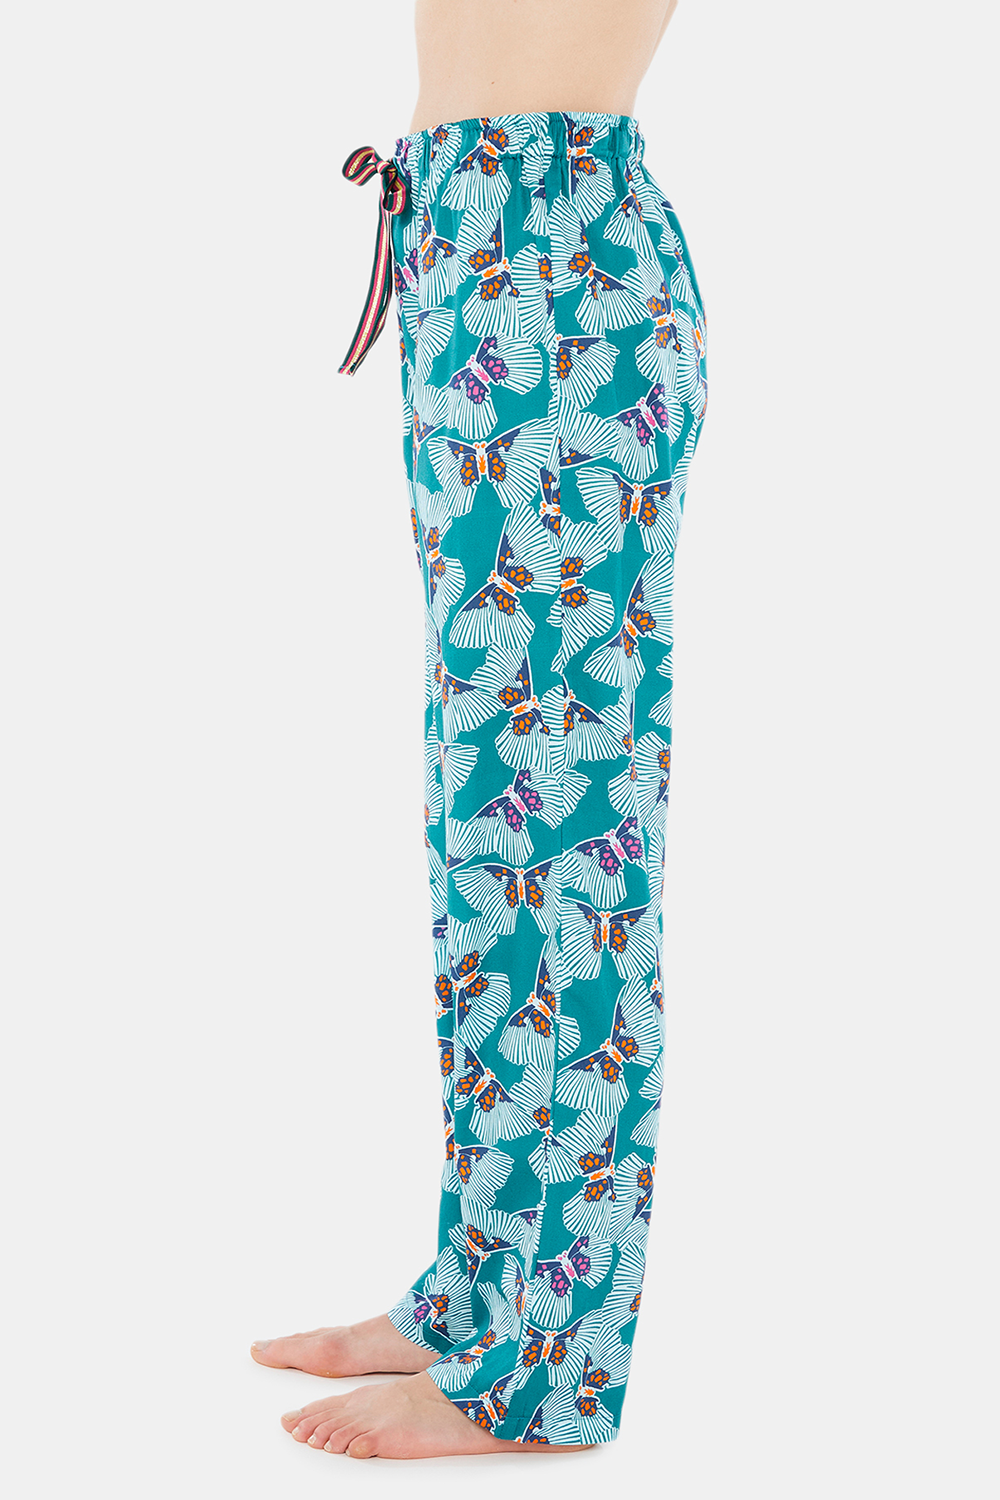 BUTTERFLY BUTTONED PAJAMA